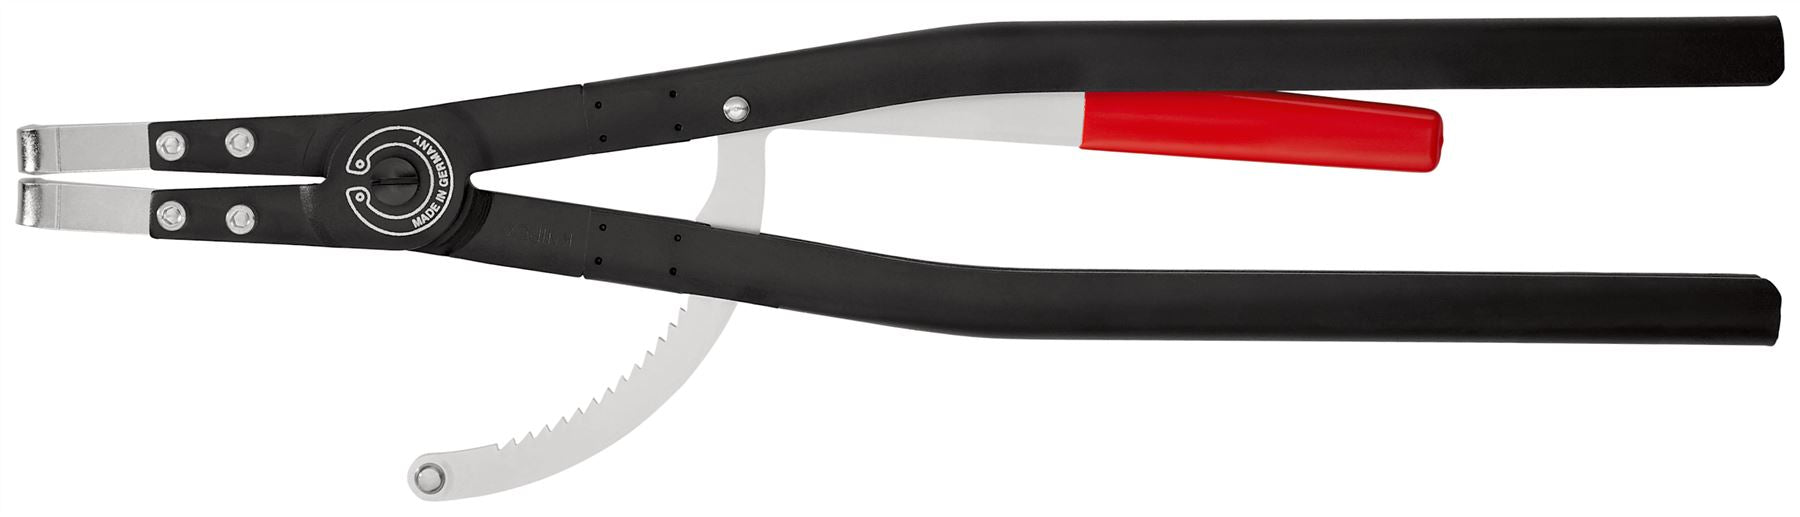 Knipex Circlip Pliers for Internal Circlips in Bore Holes 90 Degree Angled Tips 600mm 44 20 J61